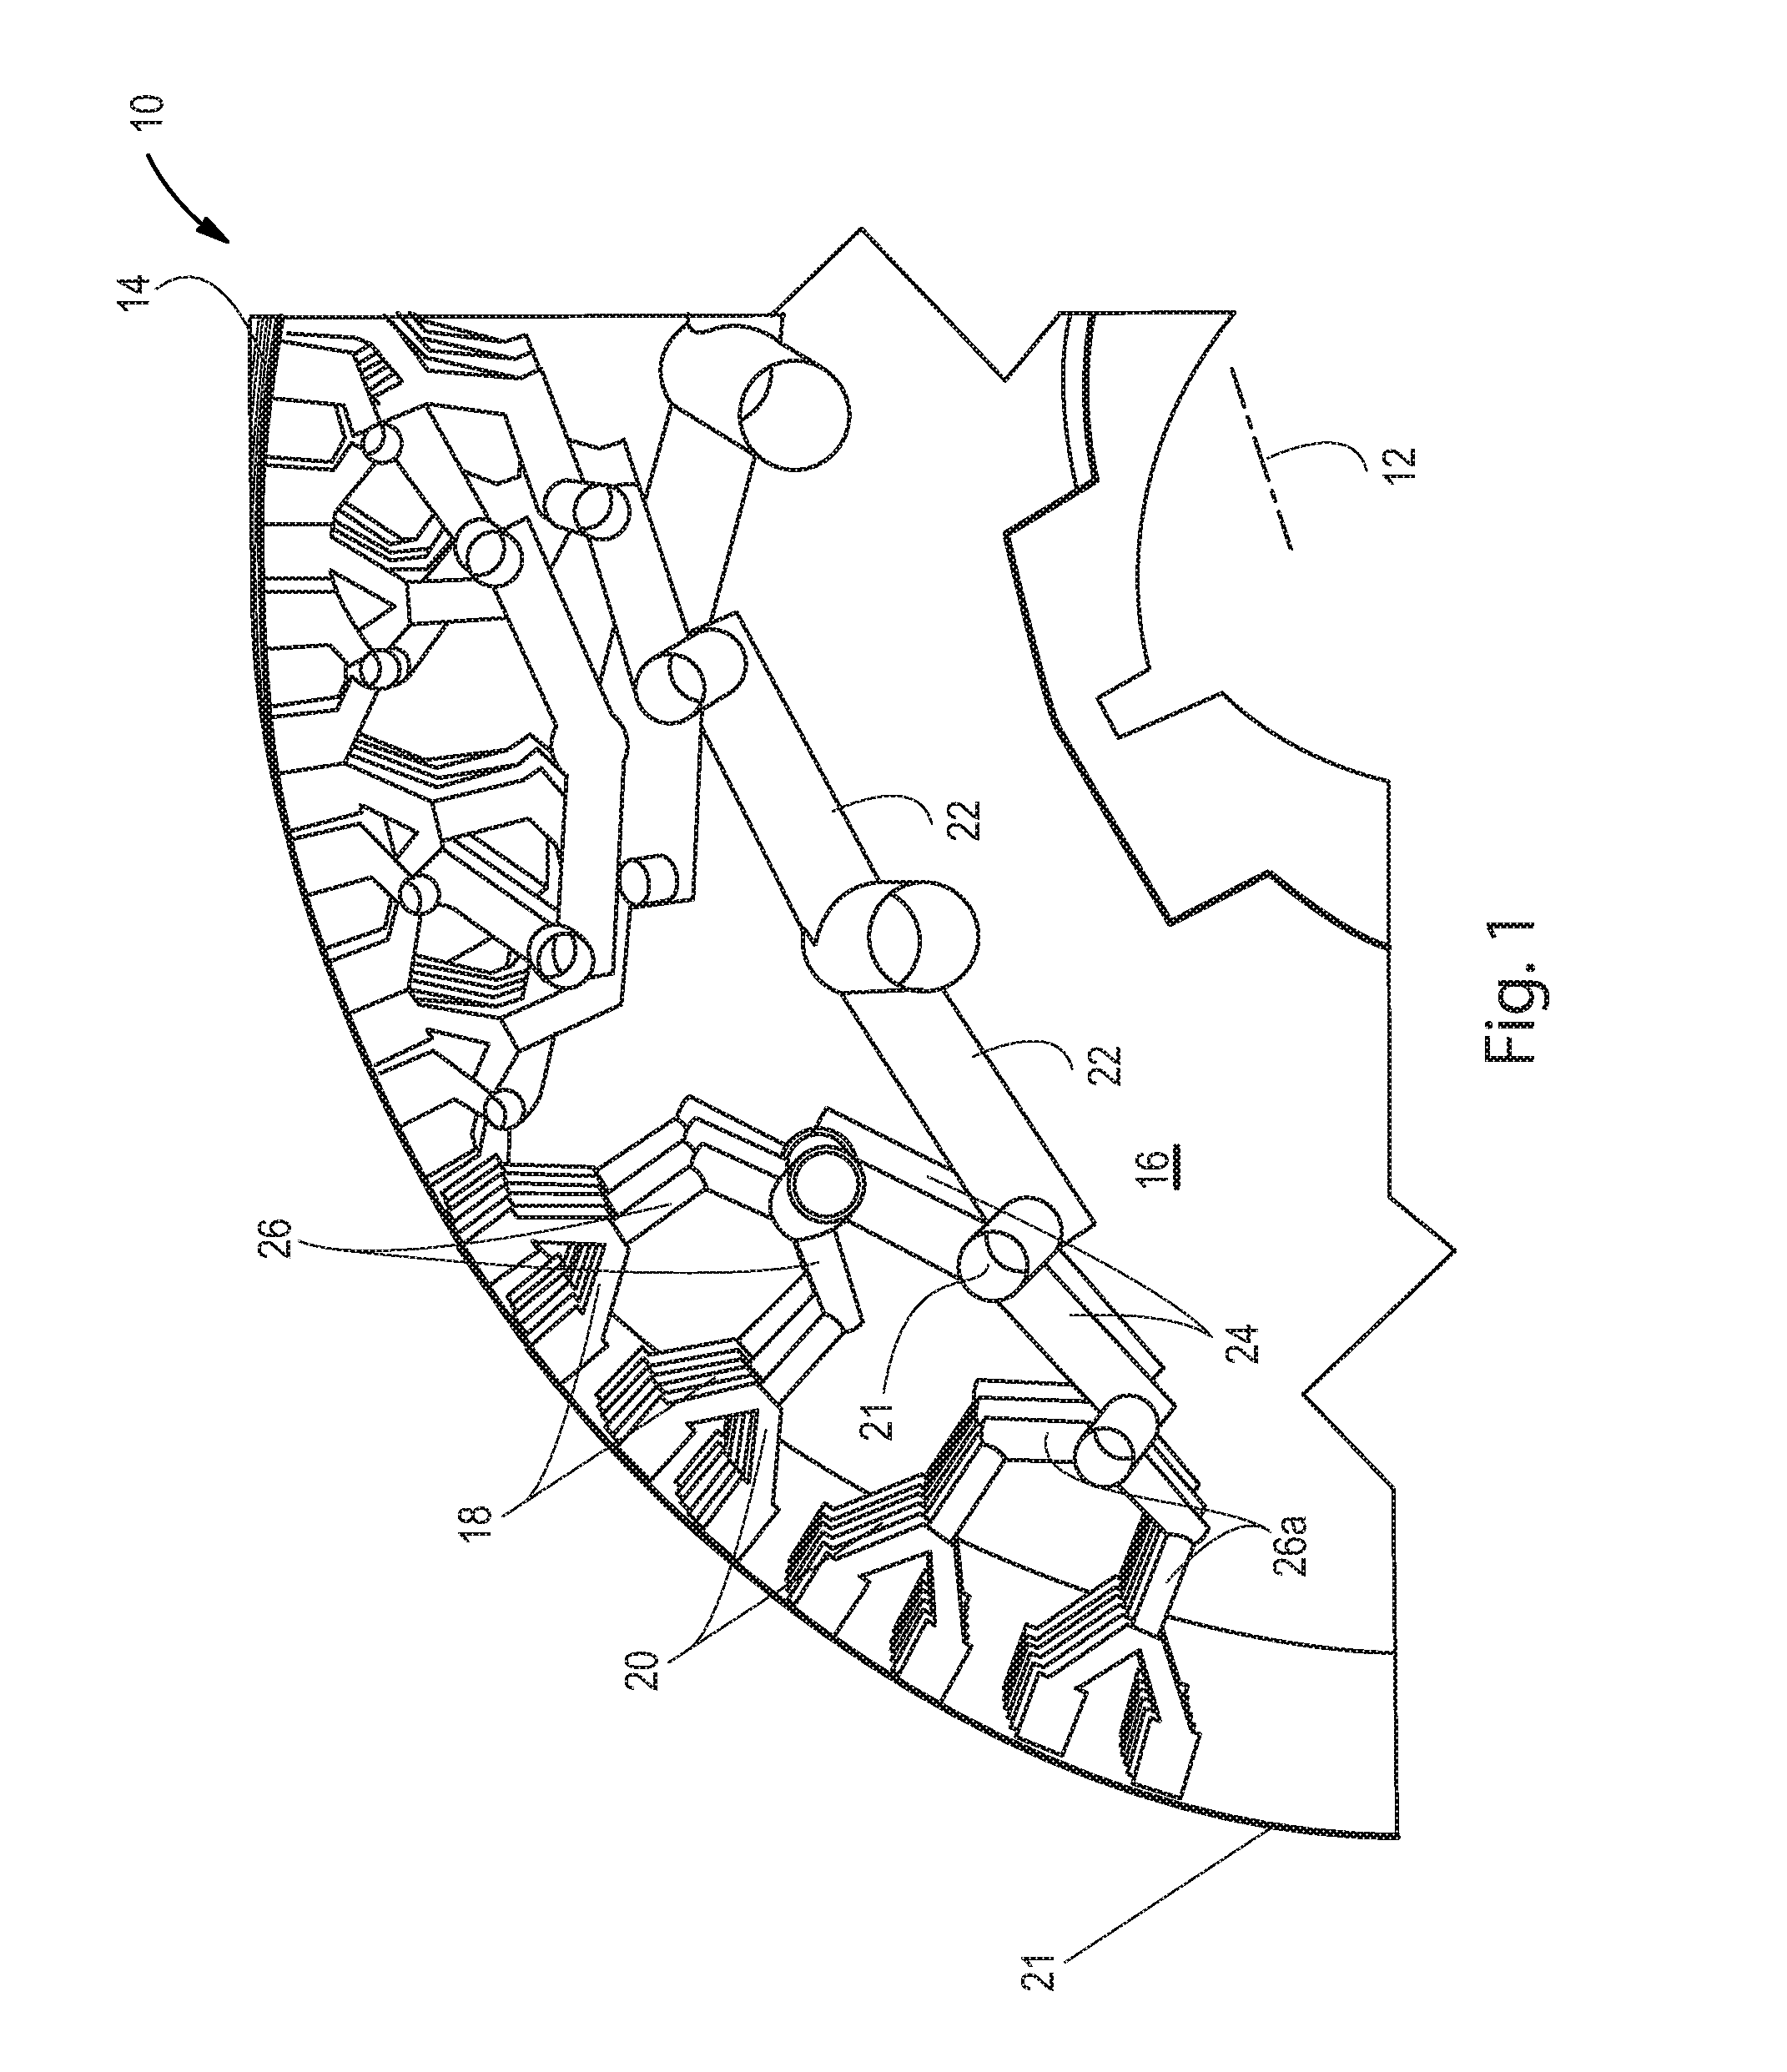 Customizable apparatus and method for transporting and depositing fluids